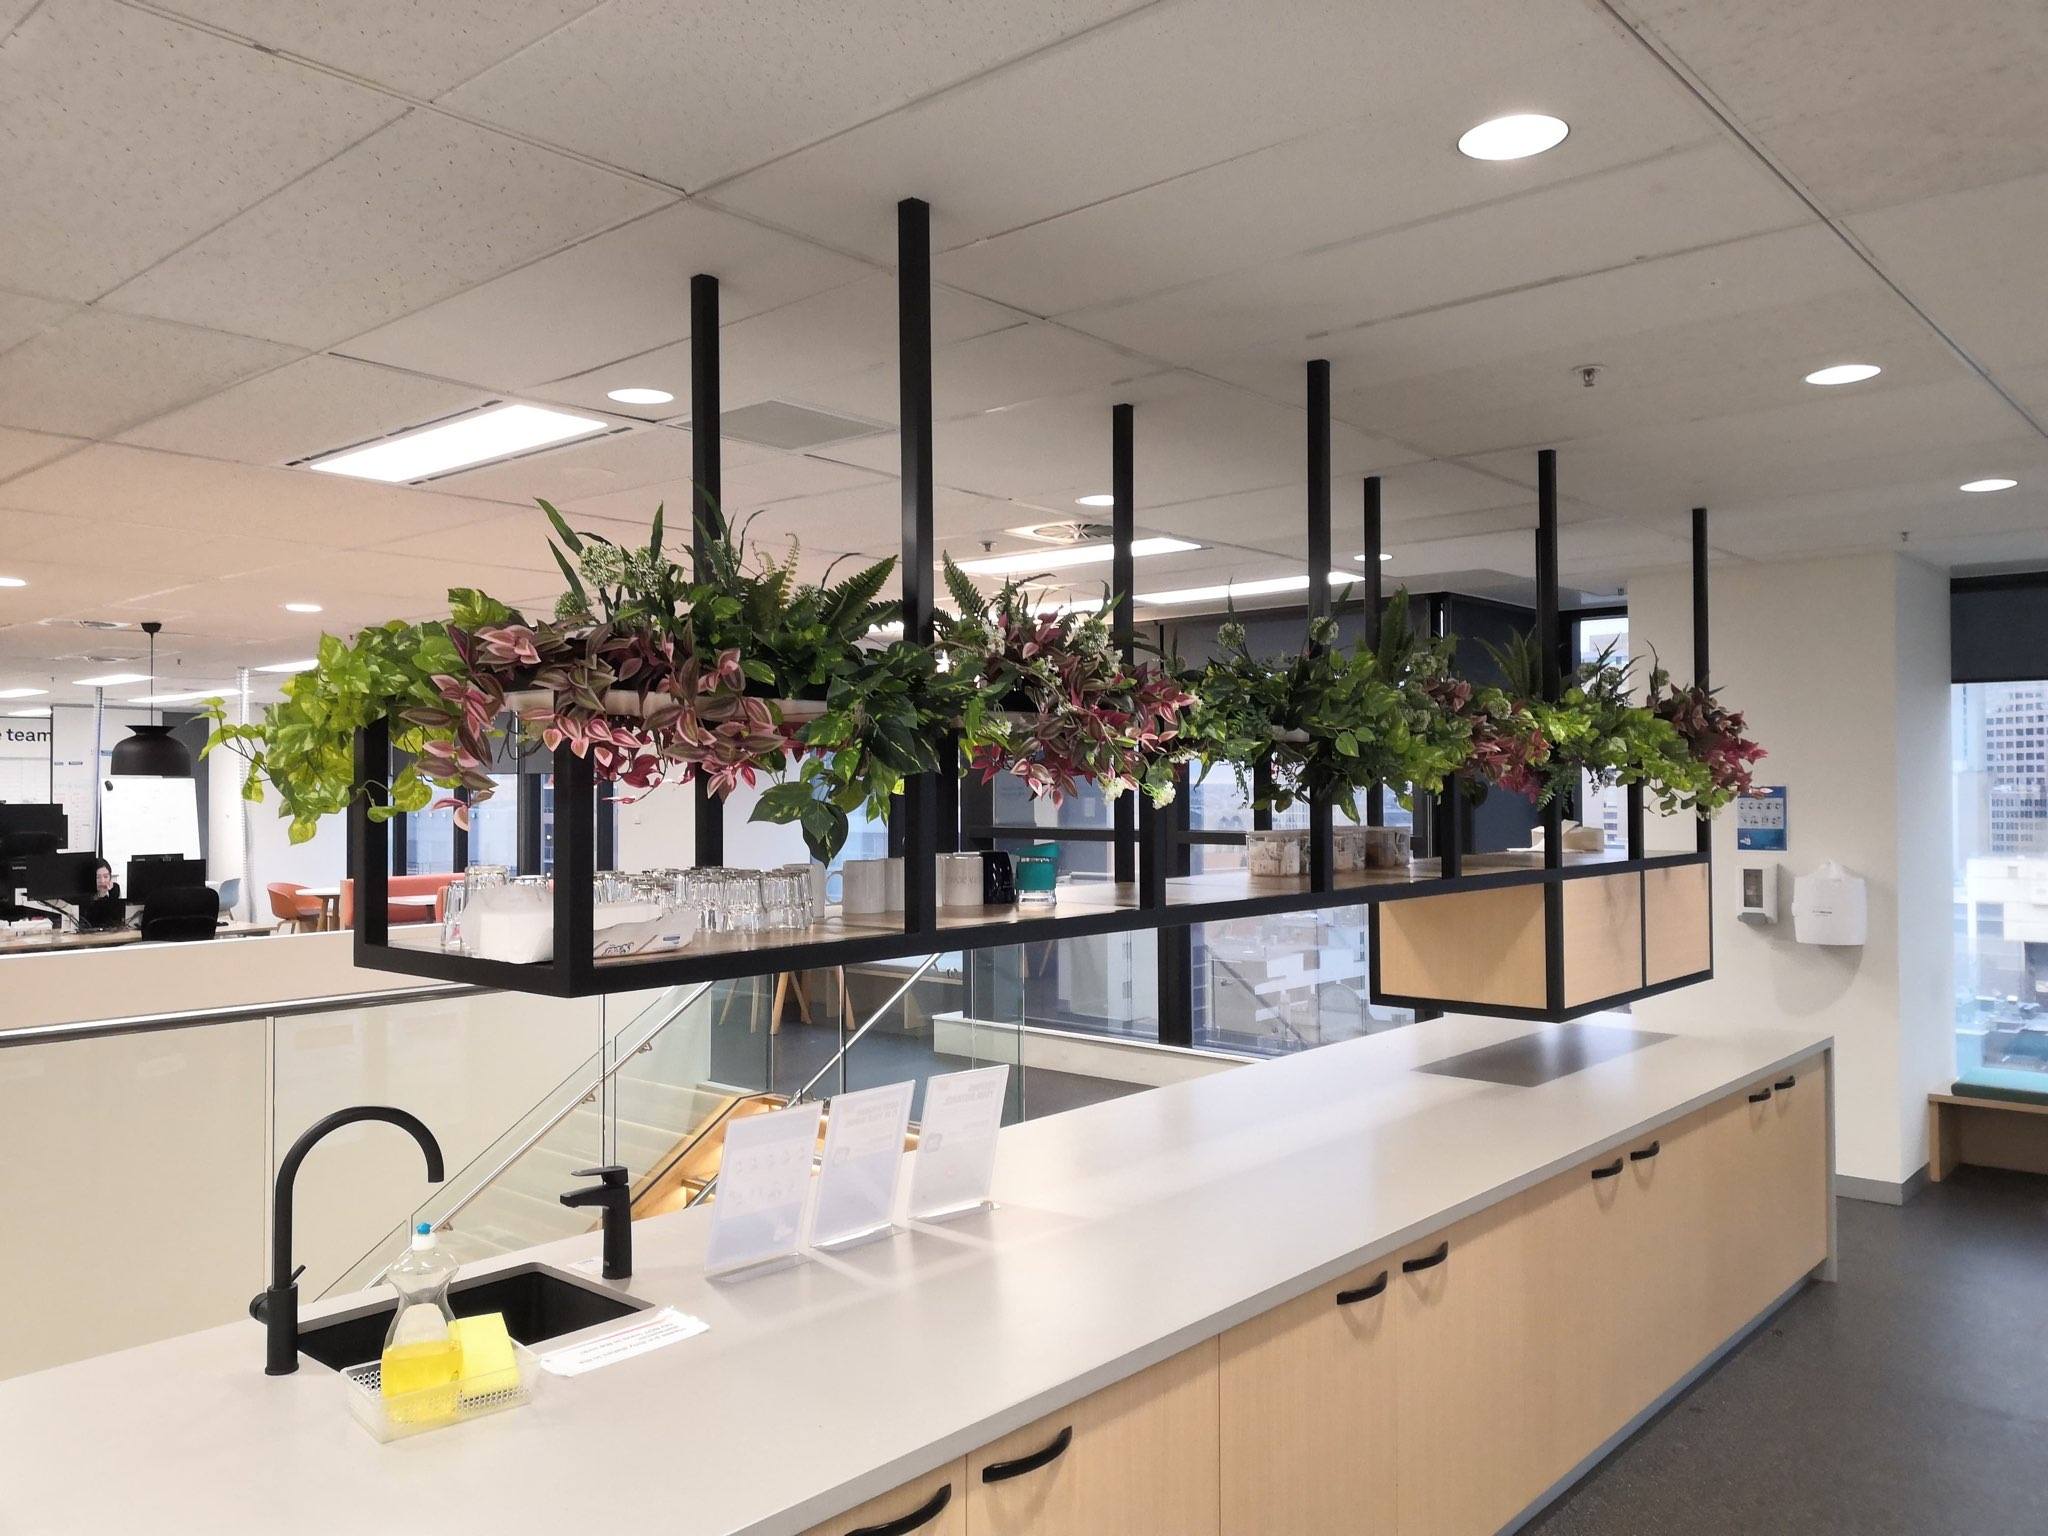 Telstra Office Greenery Installation Featuring Hanging Plants